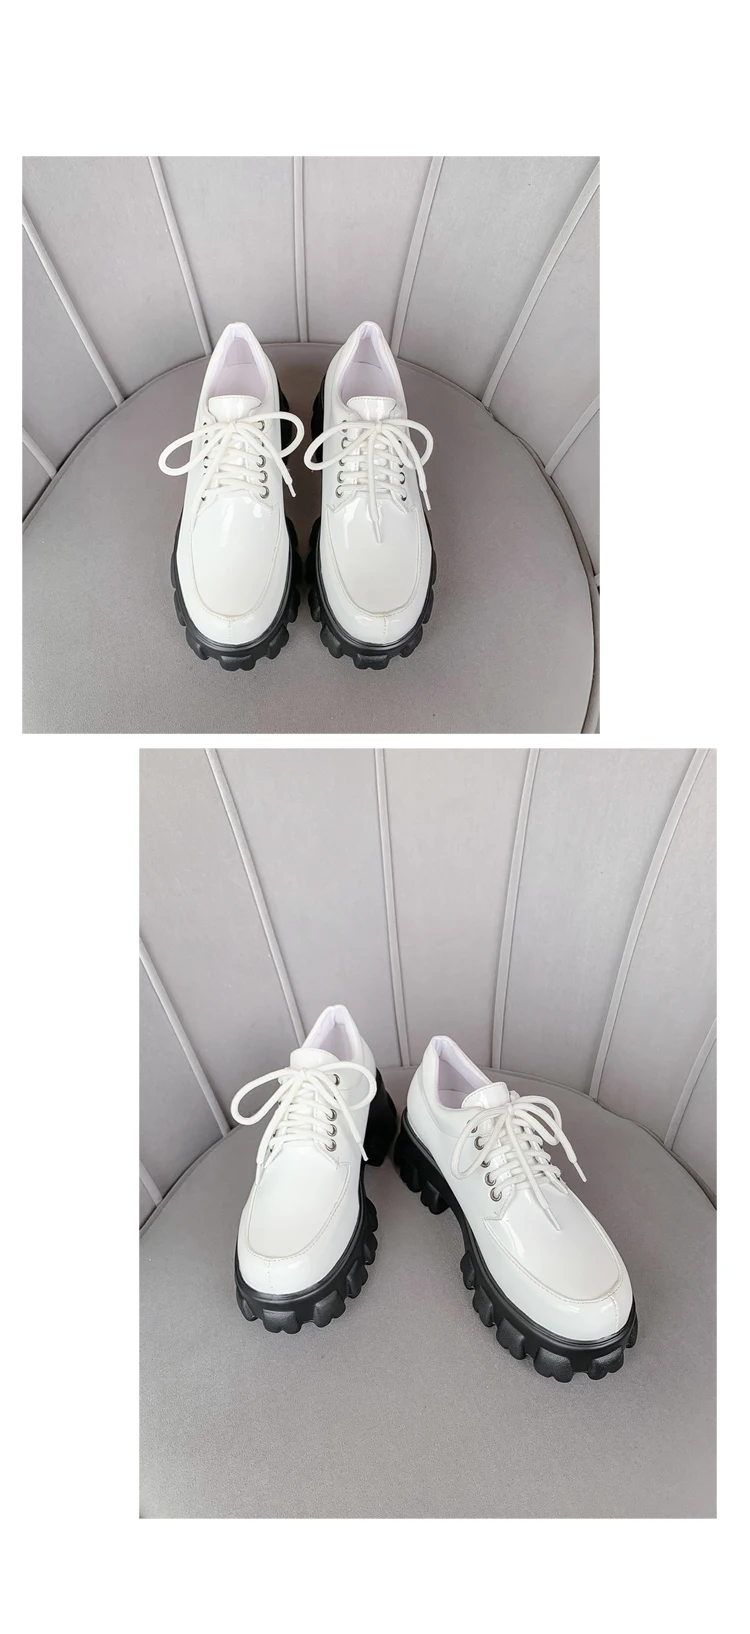 hot sale trendy women platform patent leather oxford laced up casual shoes plus size winter preppy young chic plush lining